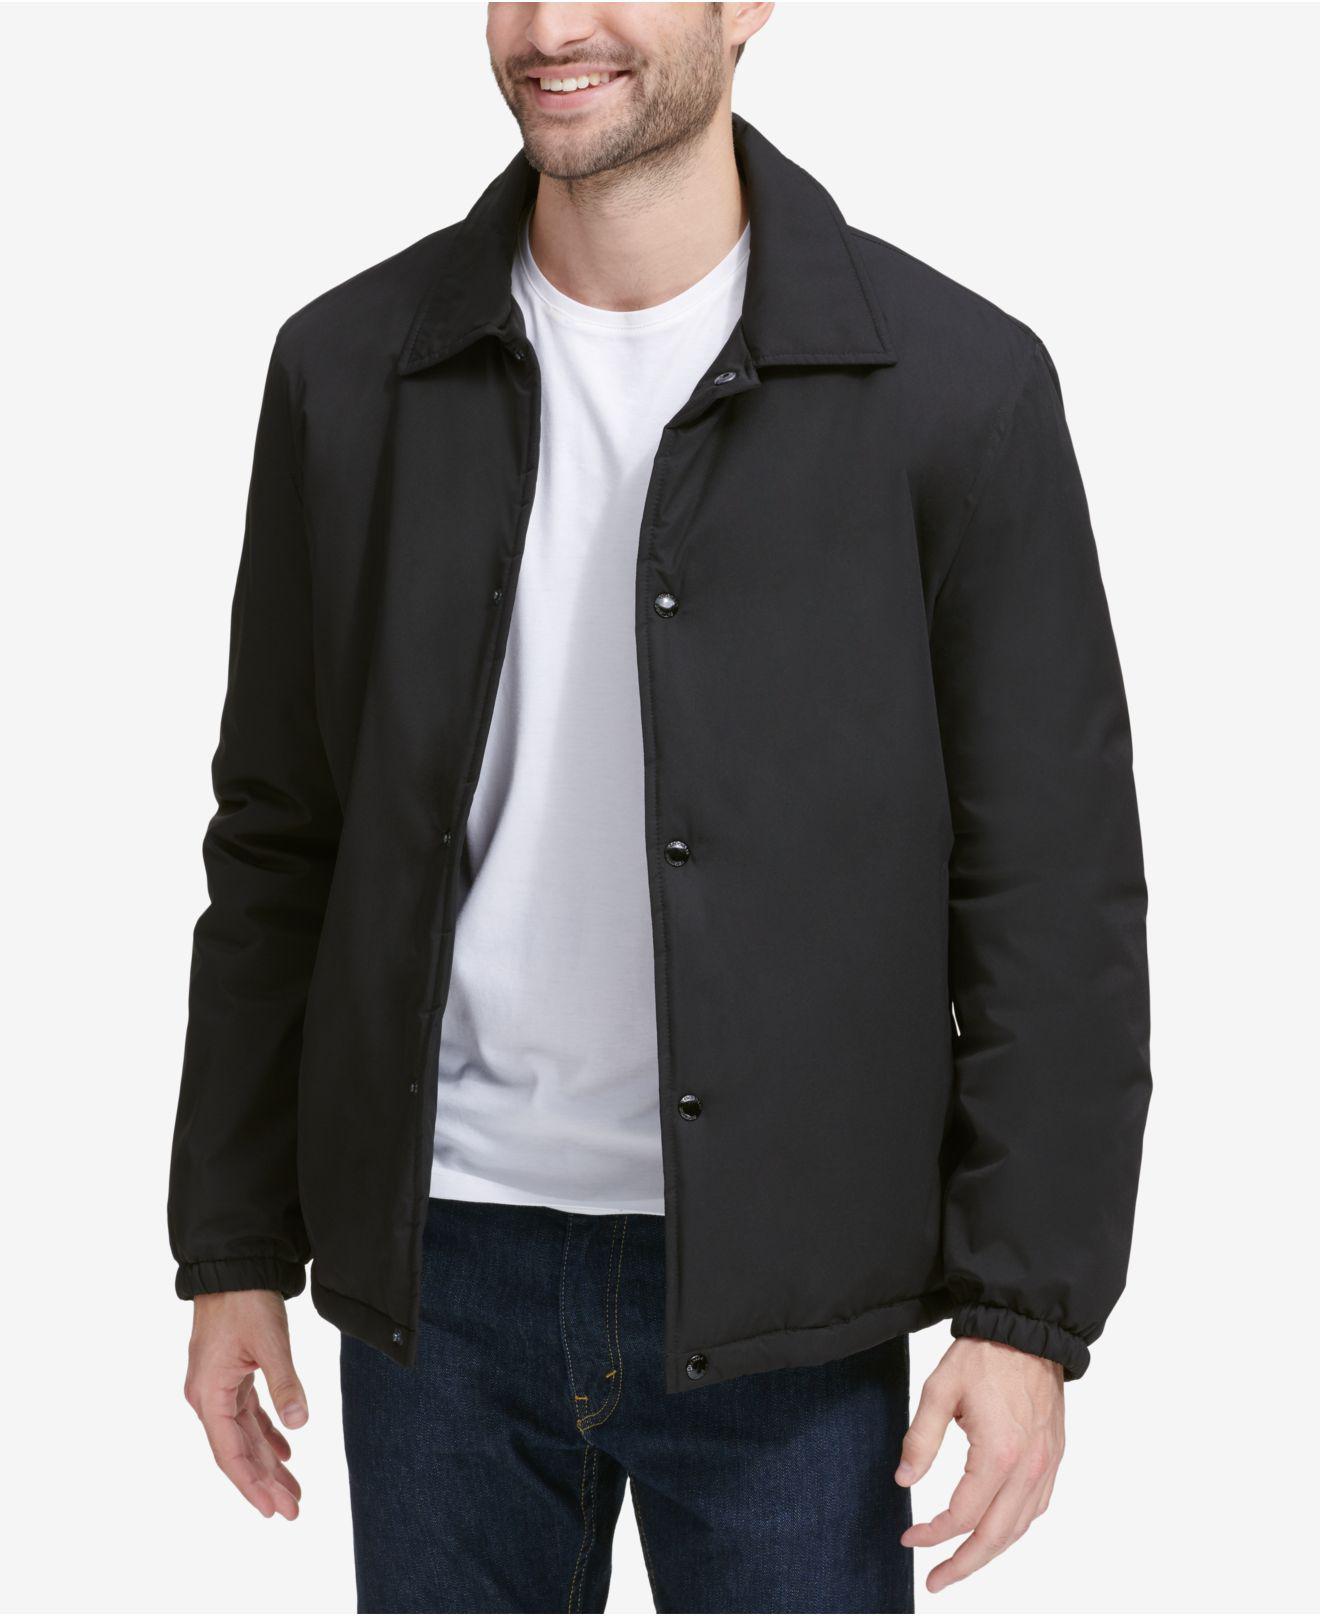 Cole Haan Coaches Jacket With Sherpa-fleece Lining in Black for Men - Lyst